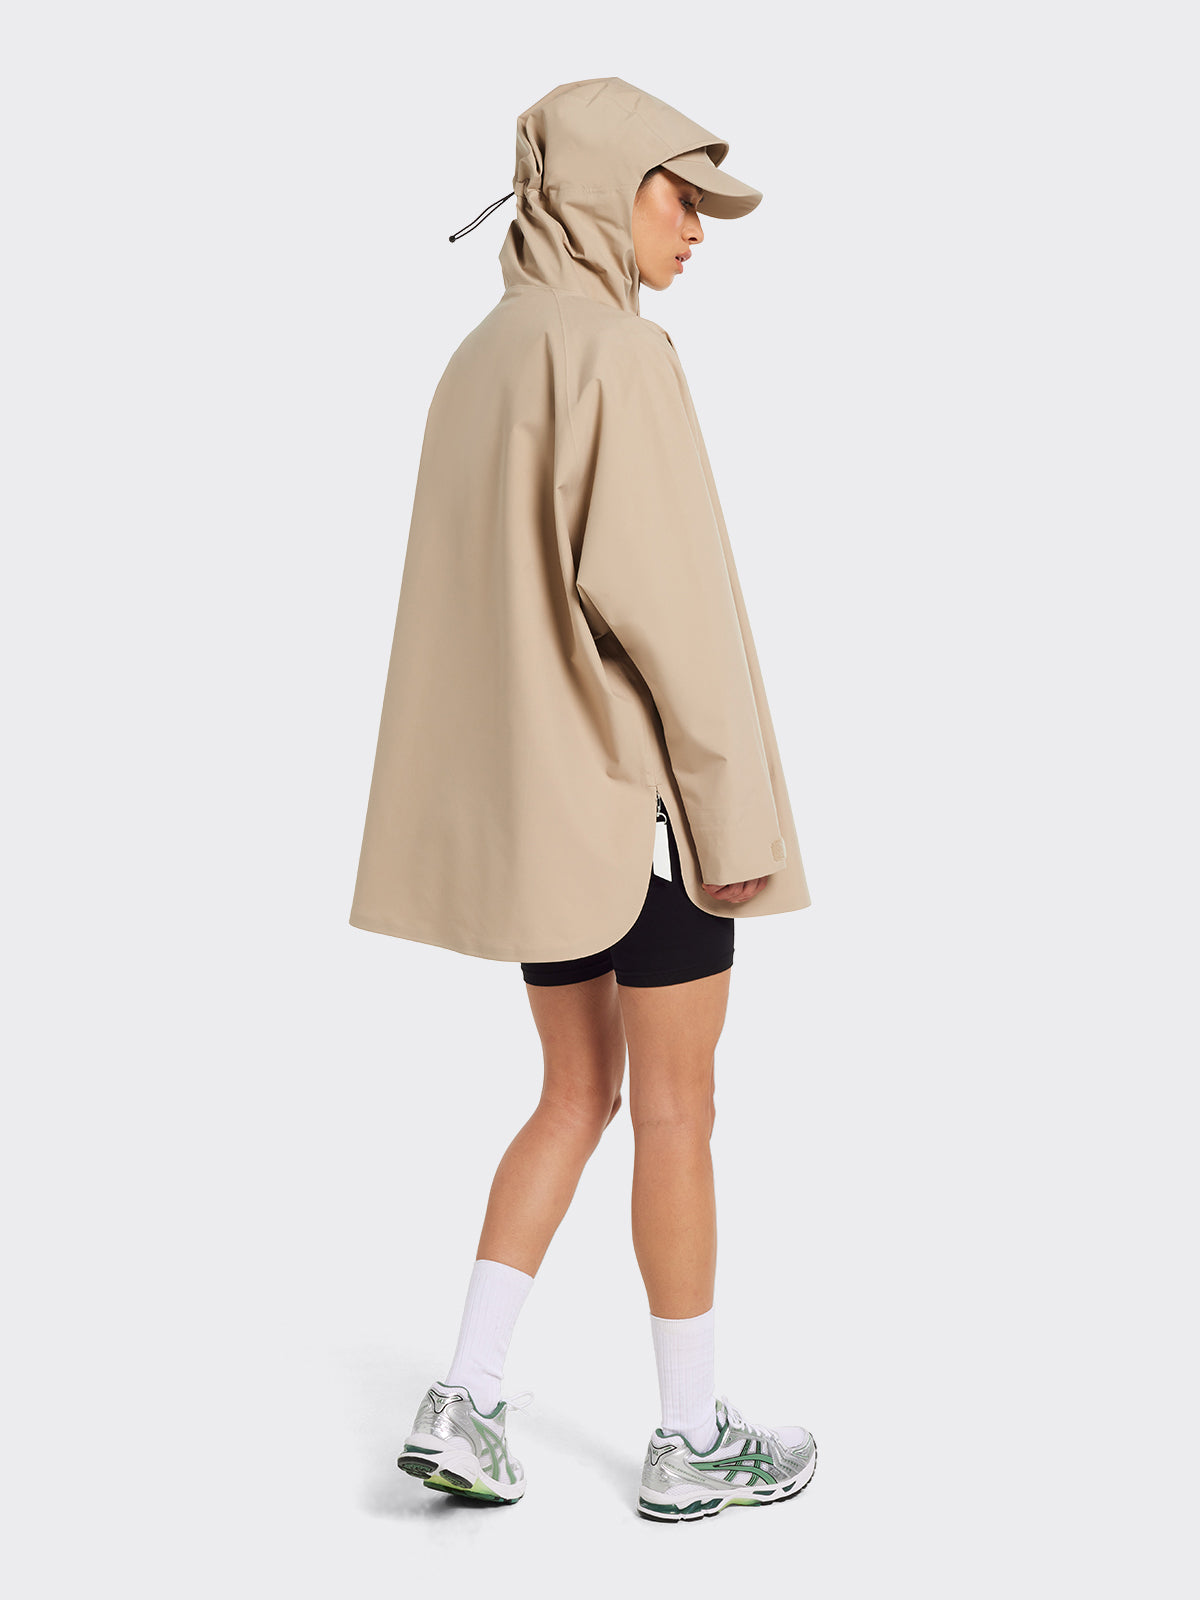 Woman wearing Voss poncho in Beige by Blæst